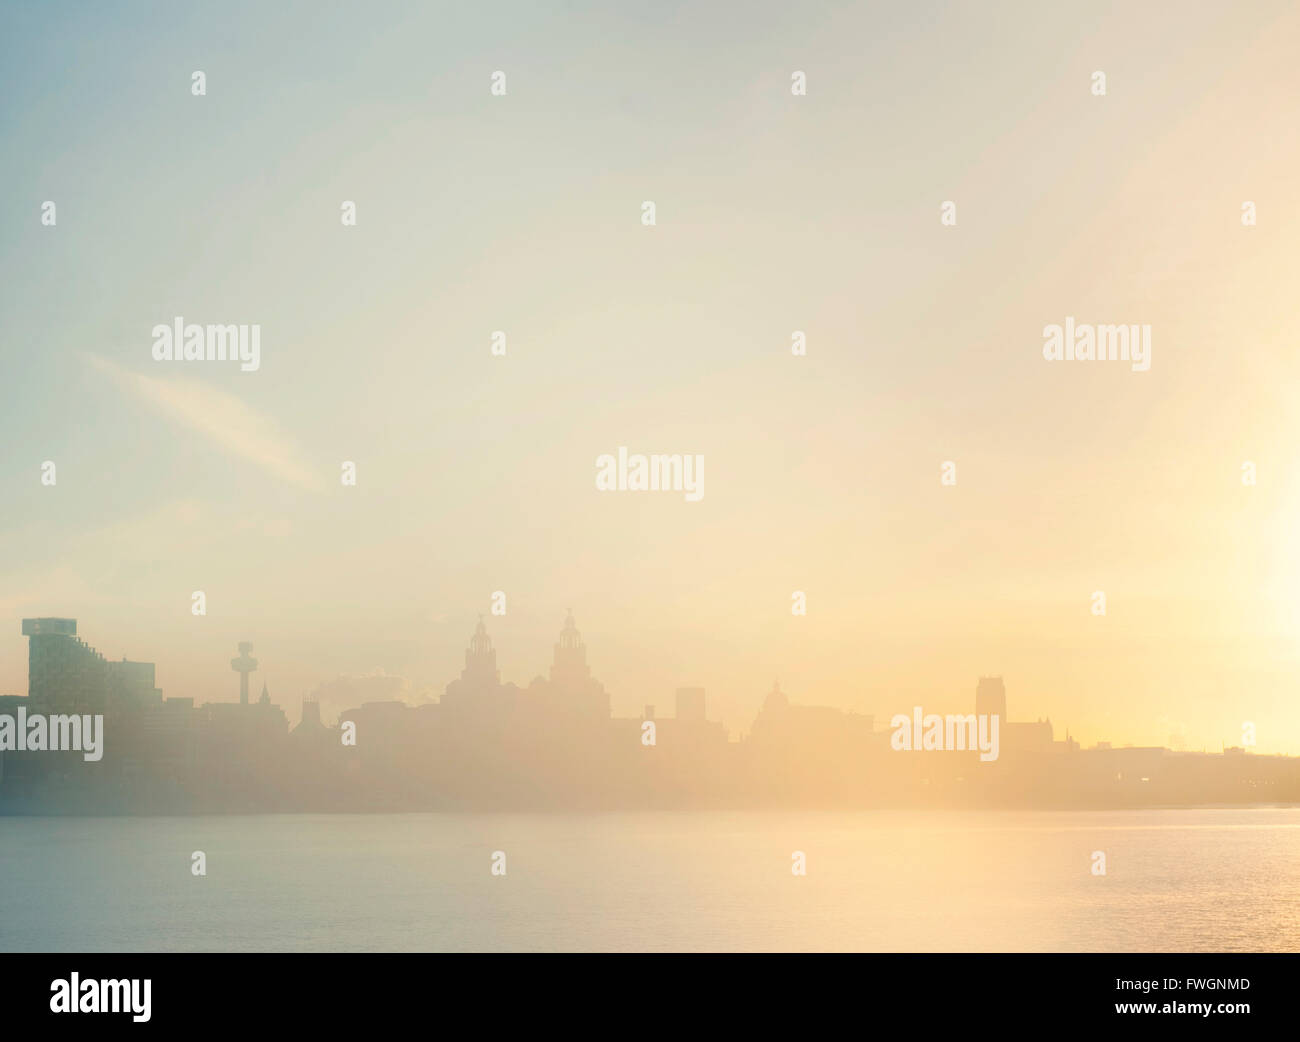 Skyline in the early morning mist, Liverpool, England, United Kingdom, Europe Stock Photo